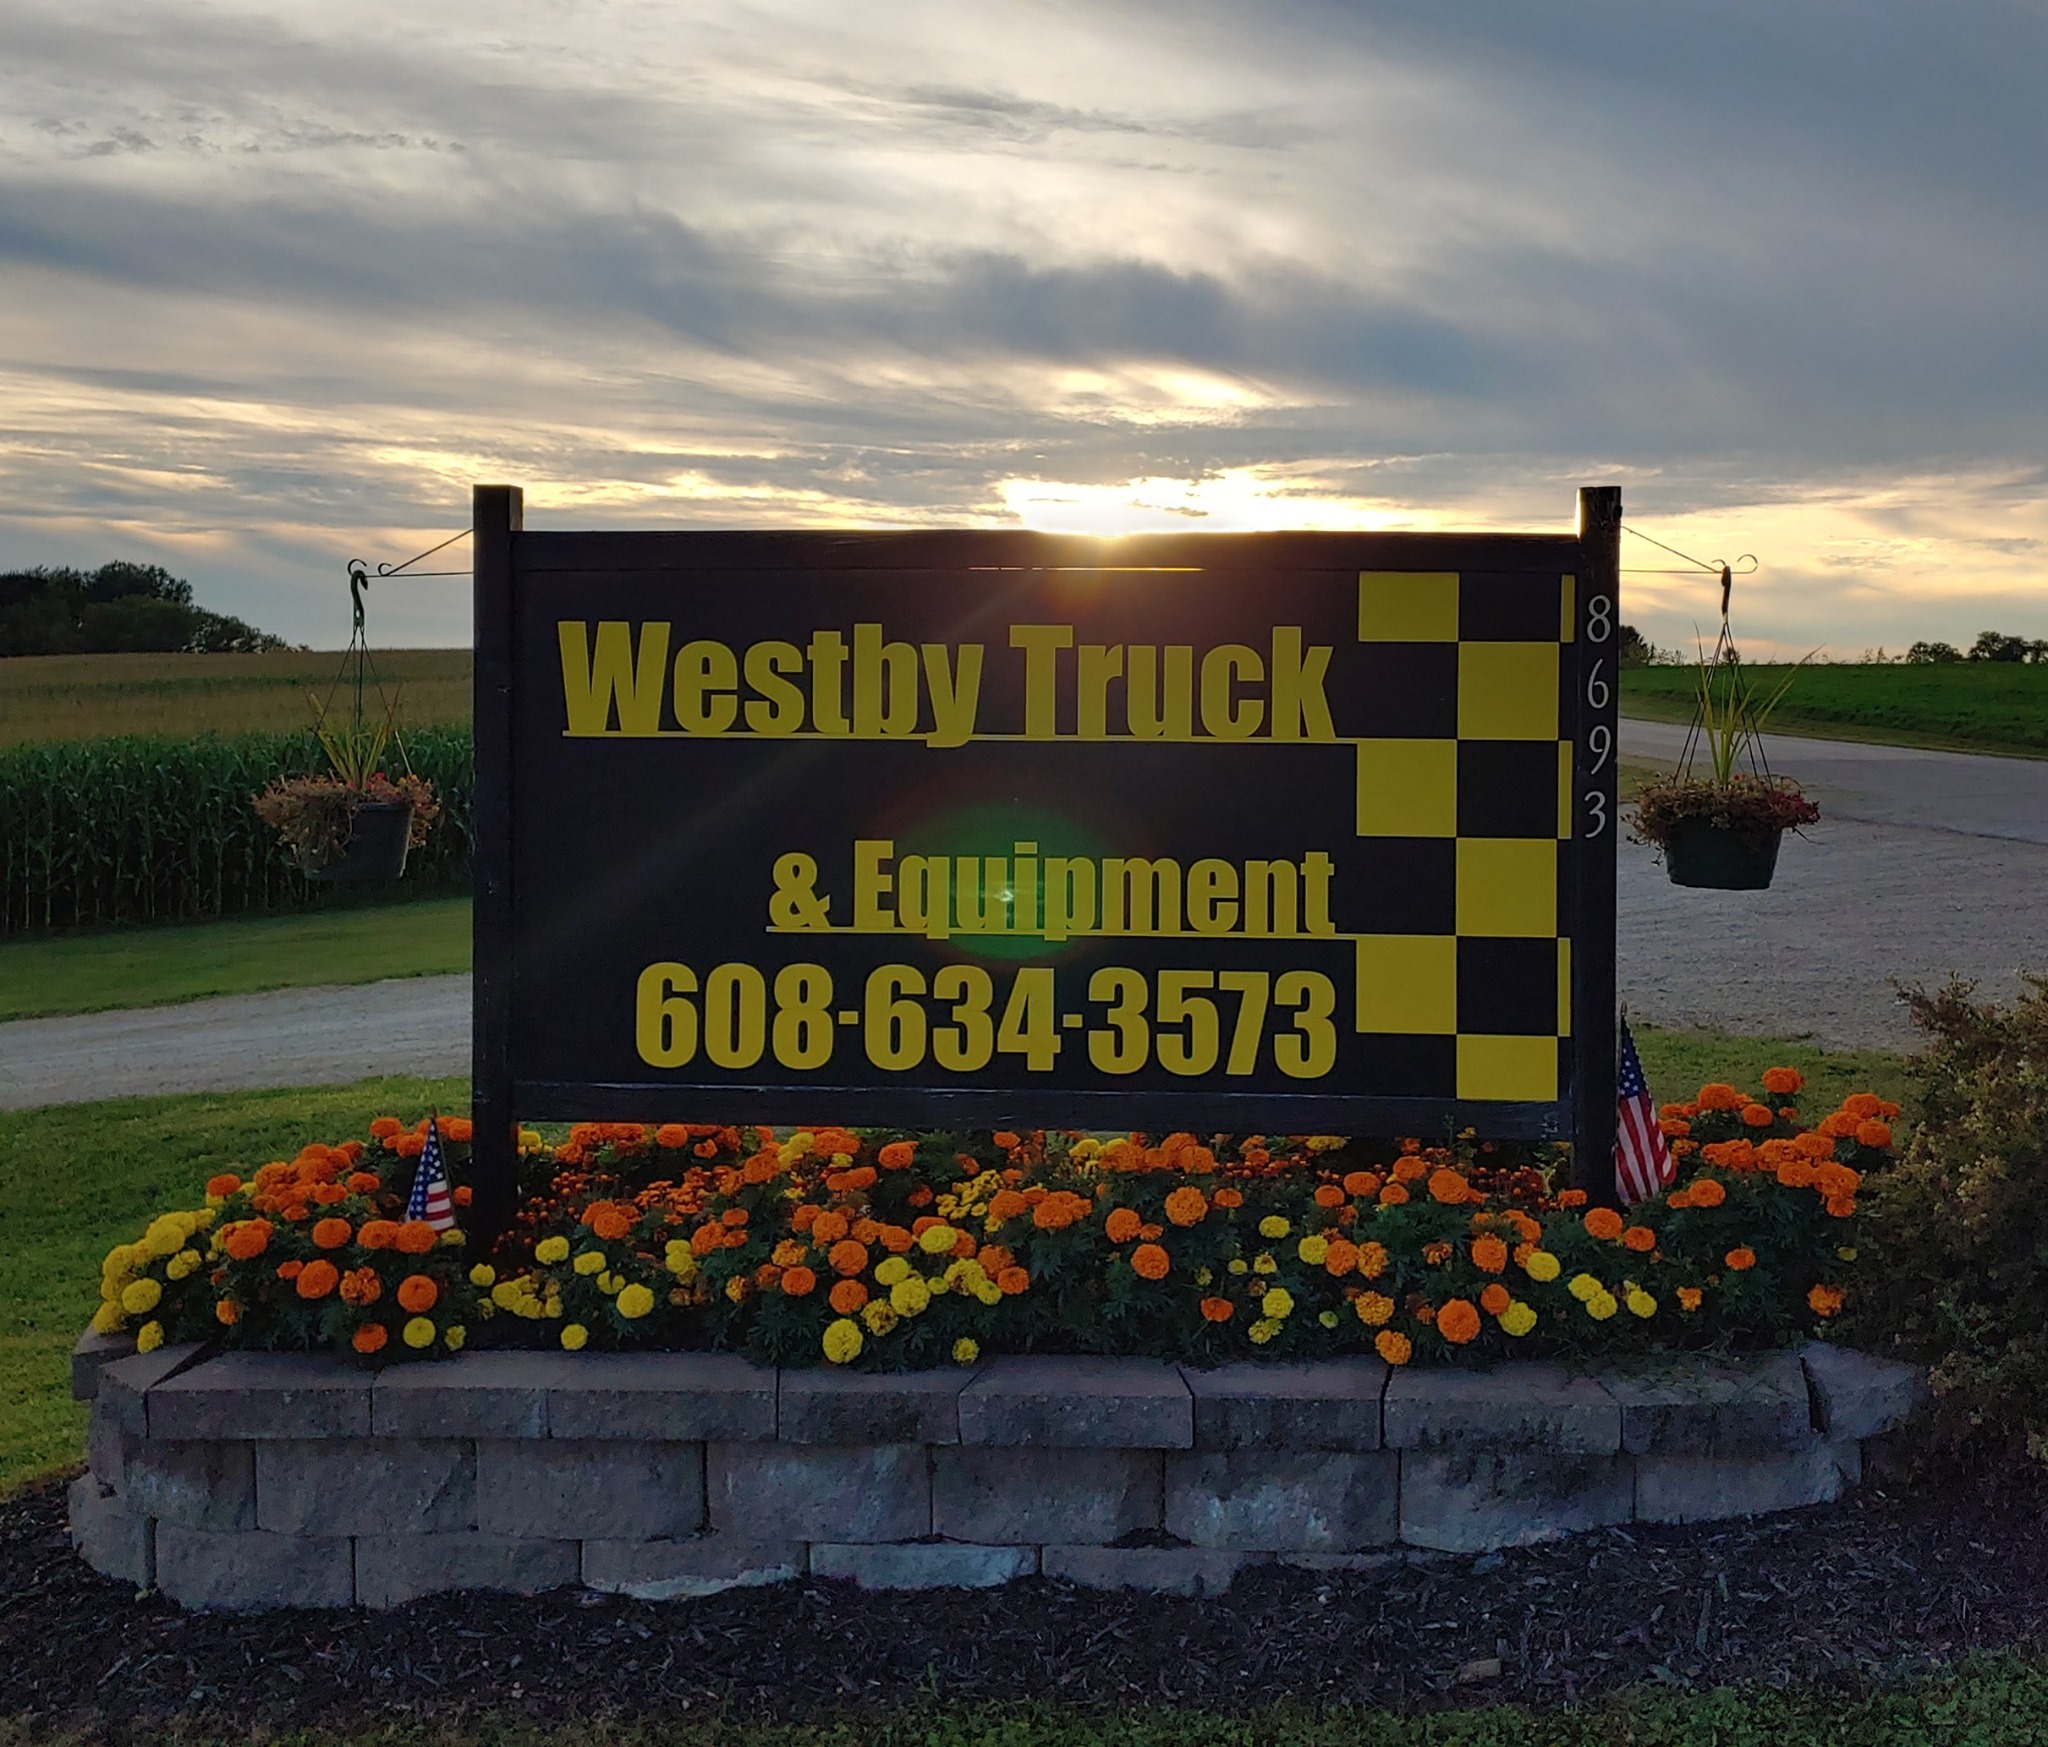 Westby Truck & Equipment